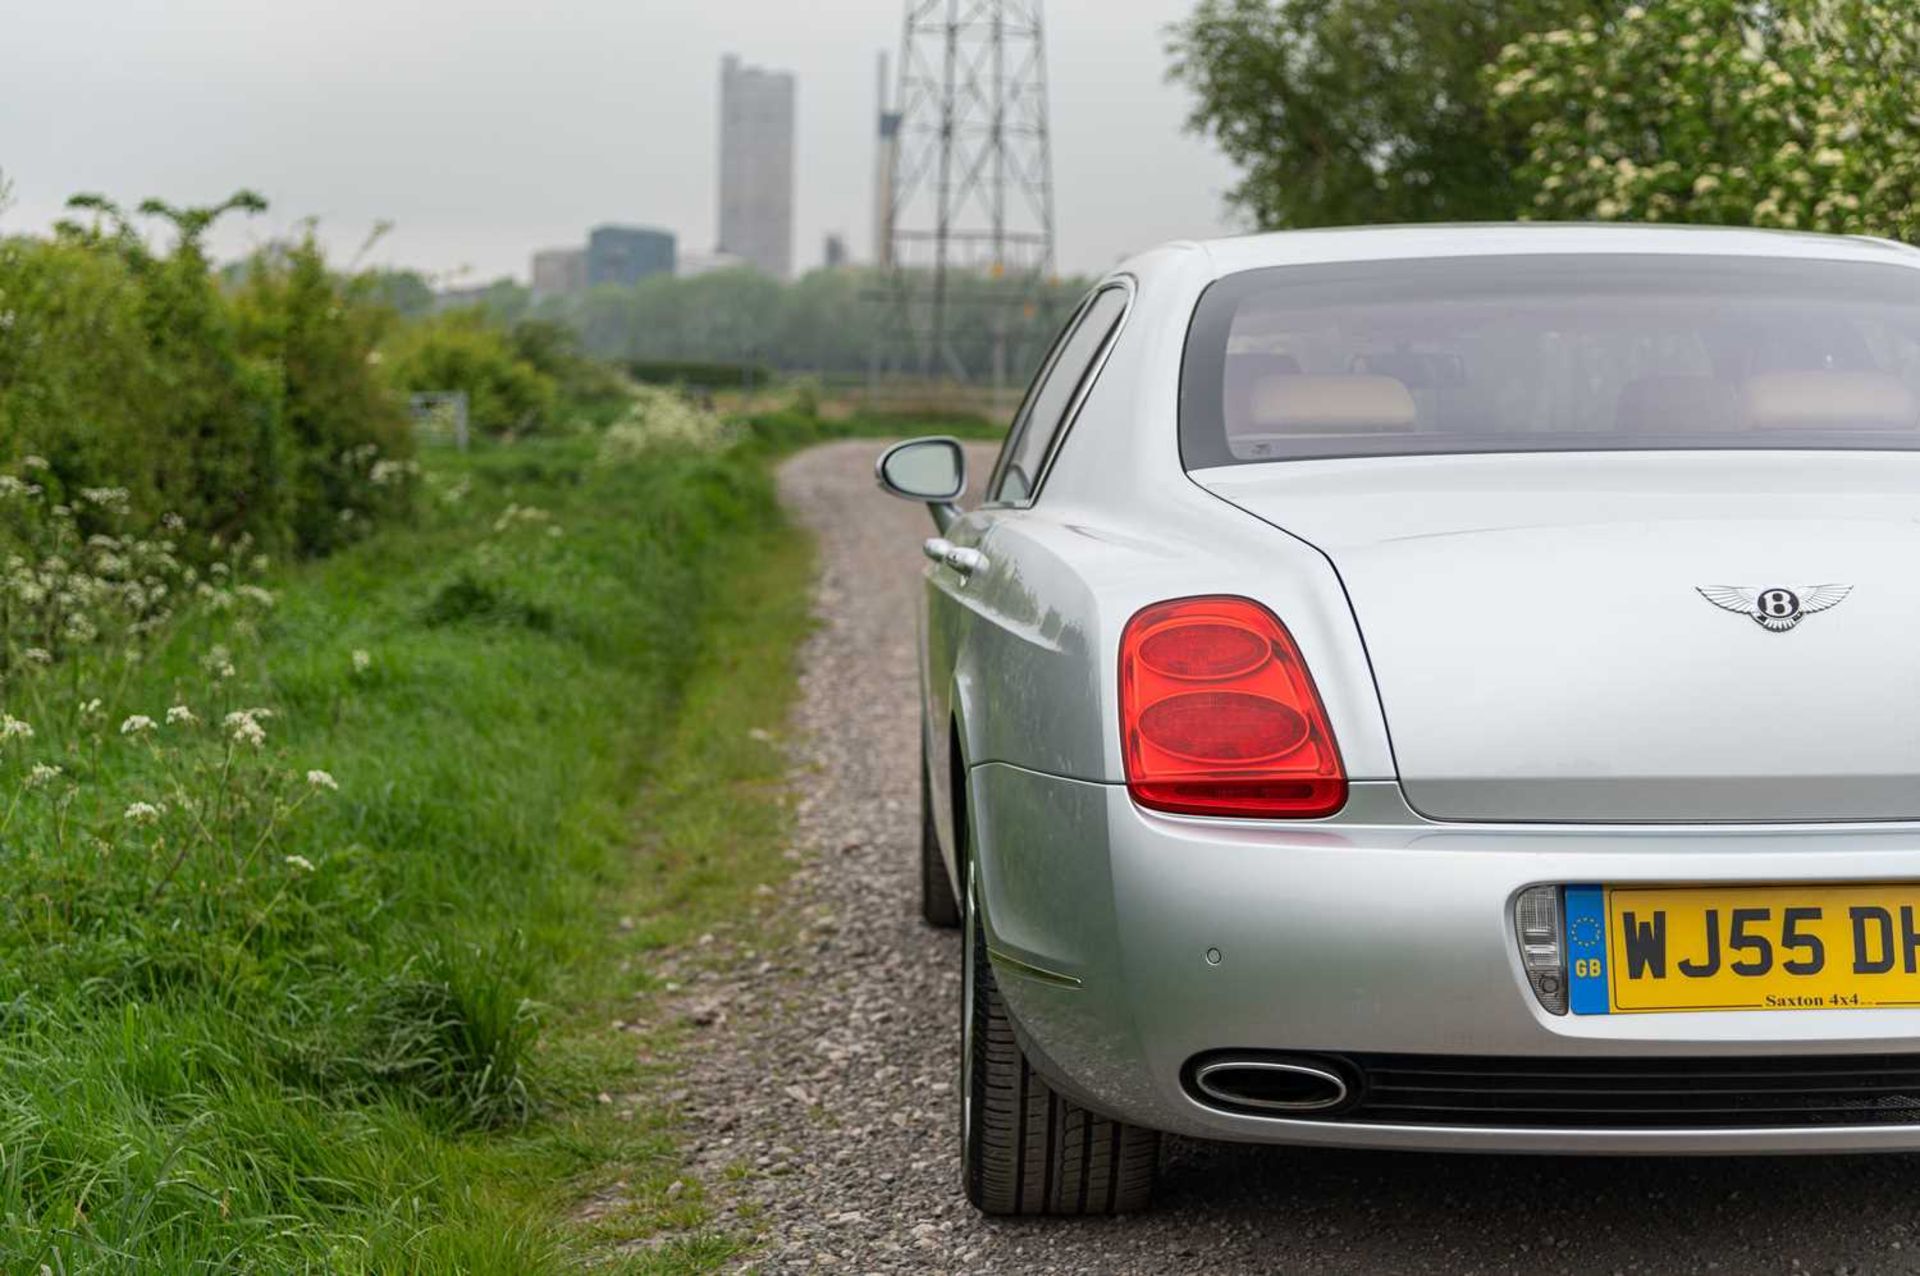 2005 Bentley Continental Flying Spur - Image 13 of 81